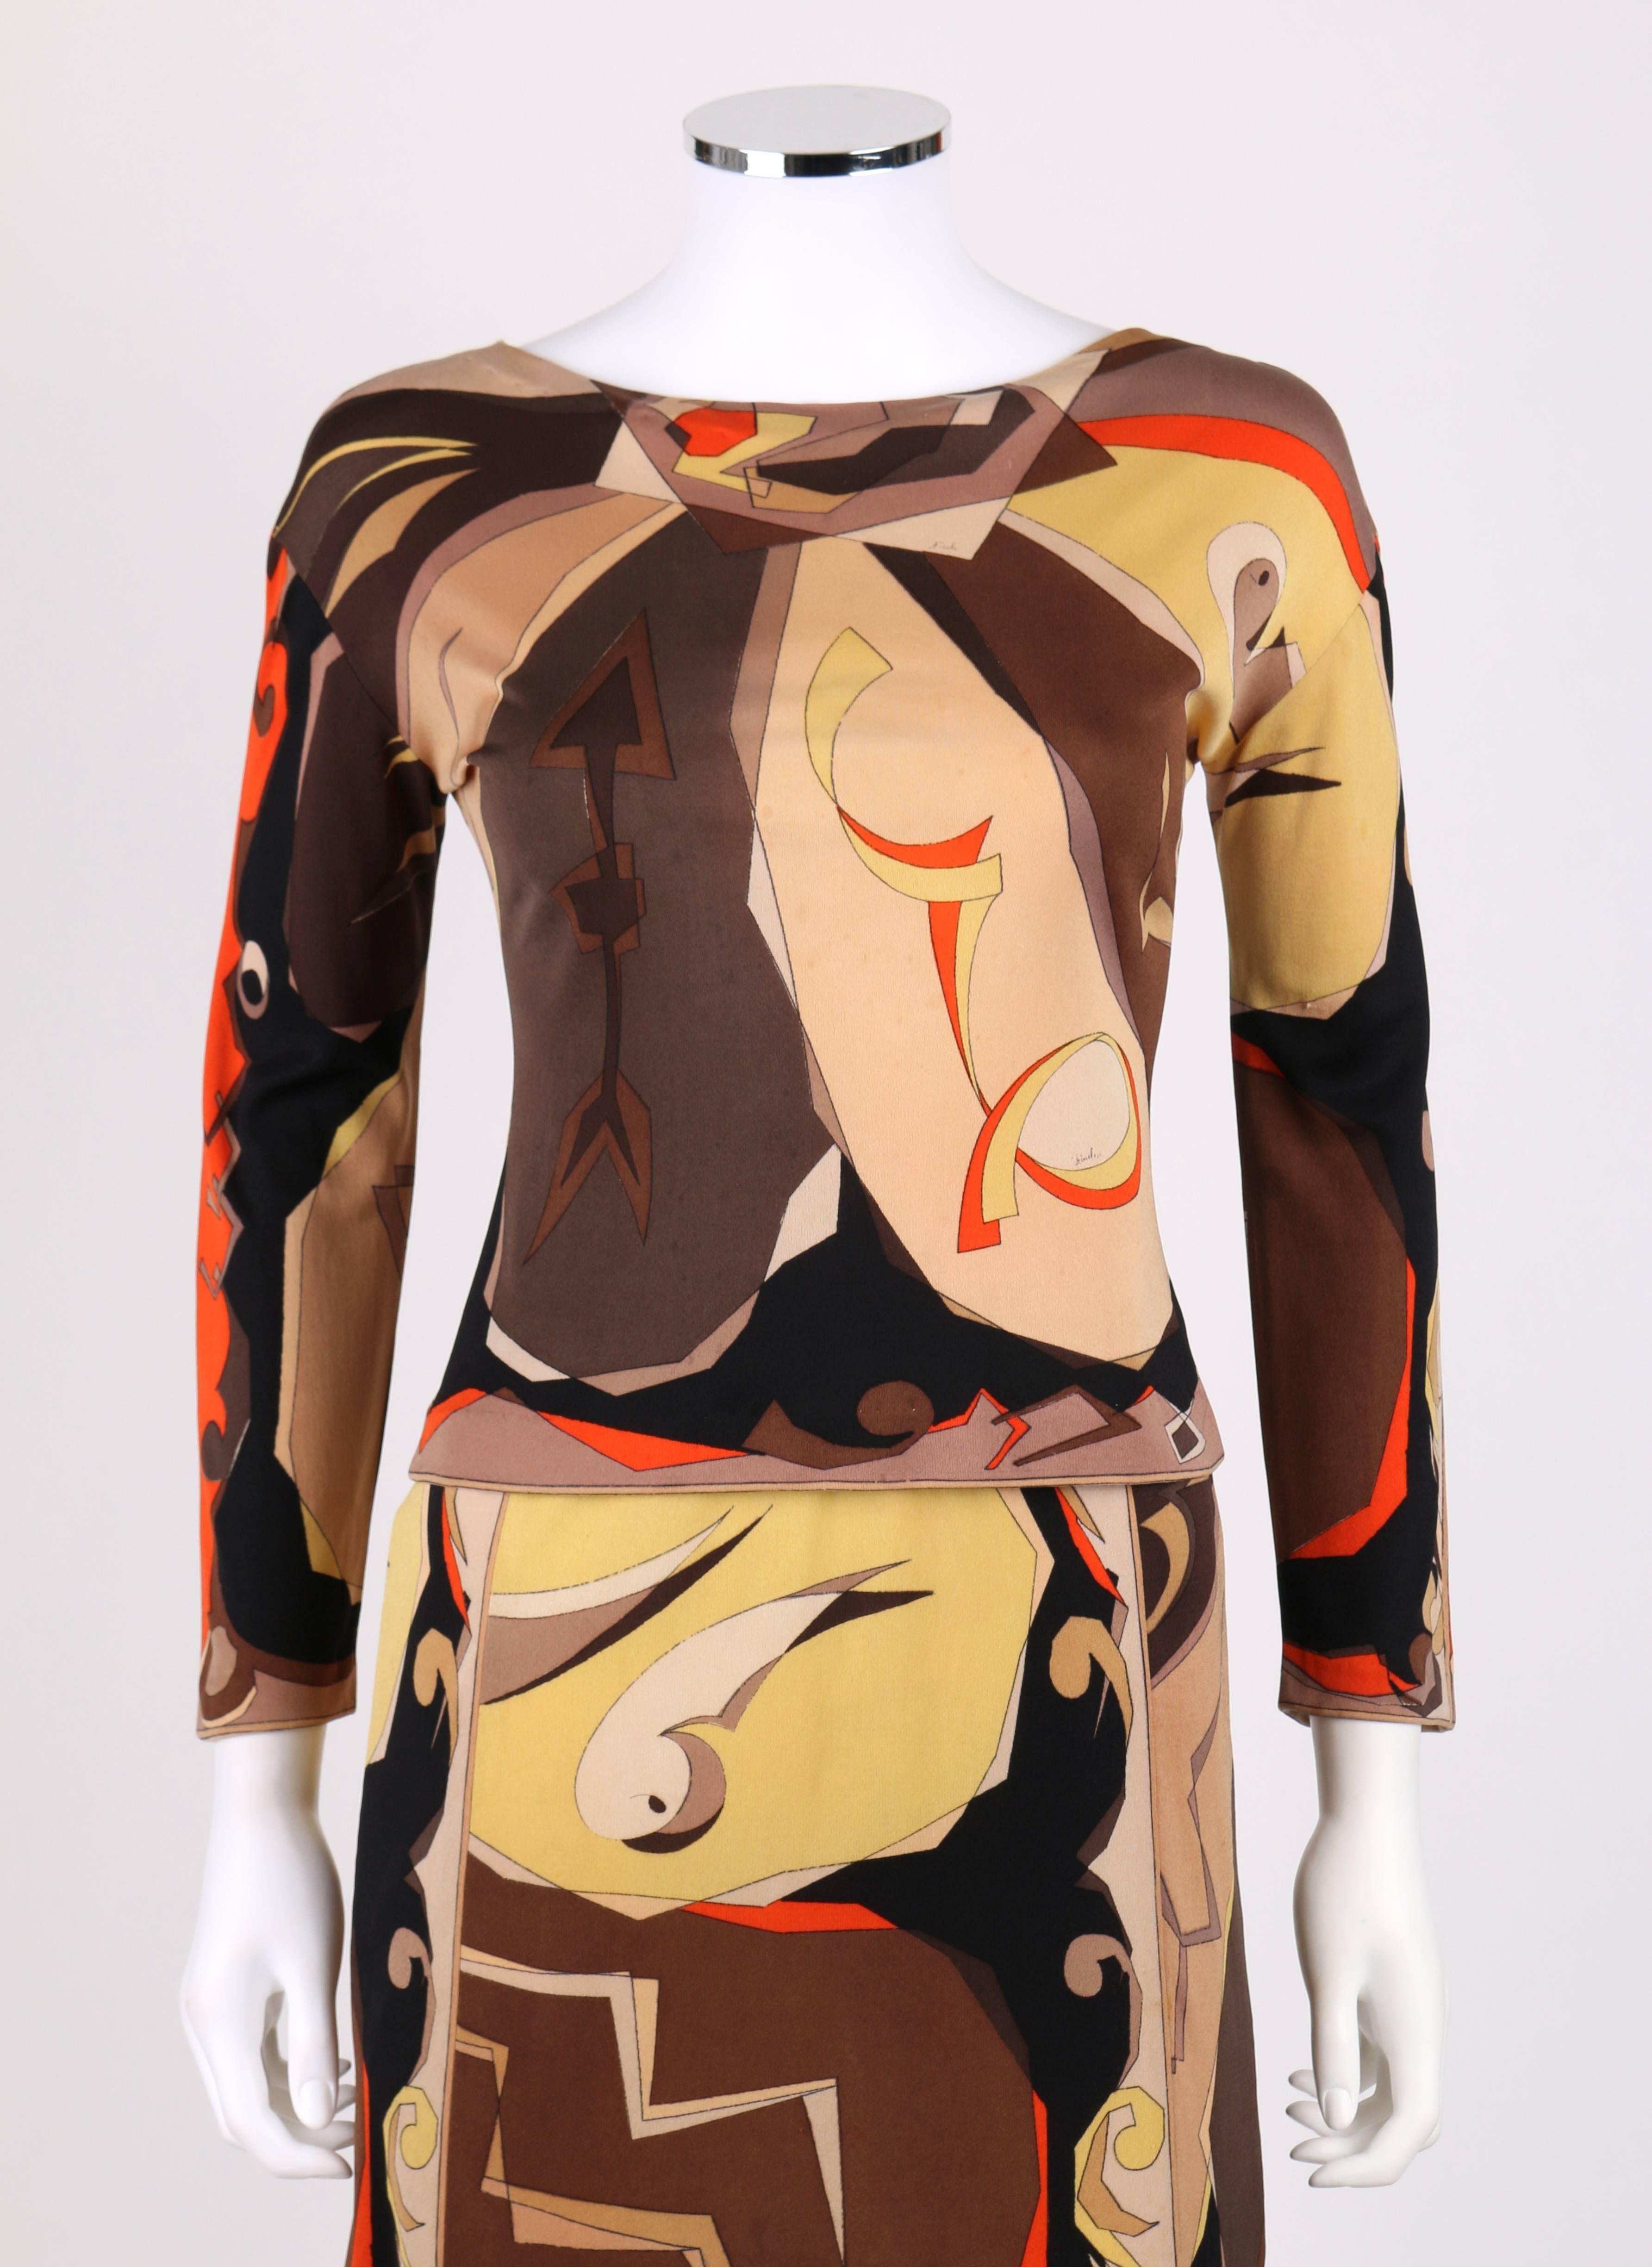 Vintage c.1960s Emilio Pucci two piece silk jersey top and skirt set. All over brown, orange and yellow abstract arrow signature print. Bateau neckline and wrist-length sleeves. A-line skirt with an elastic waistband. Marked Fabric Content: 